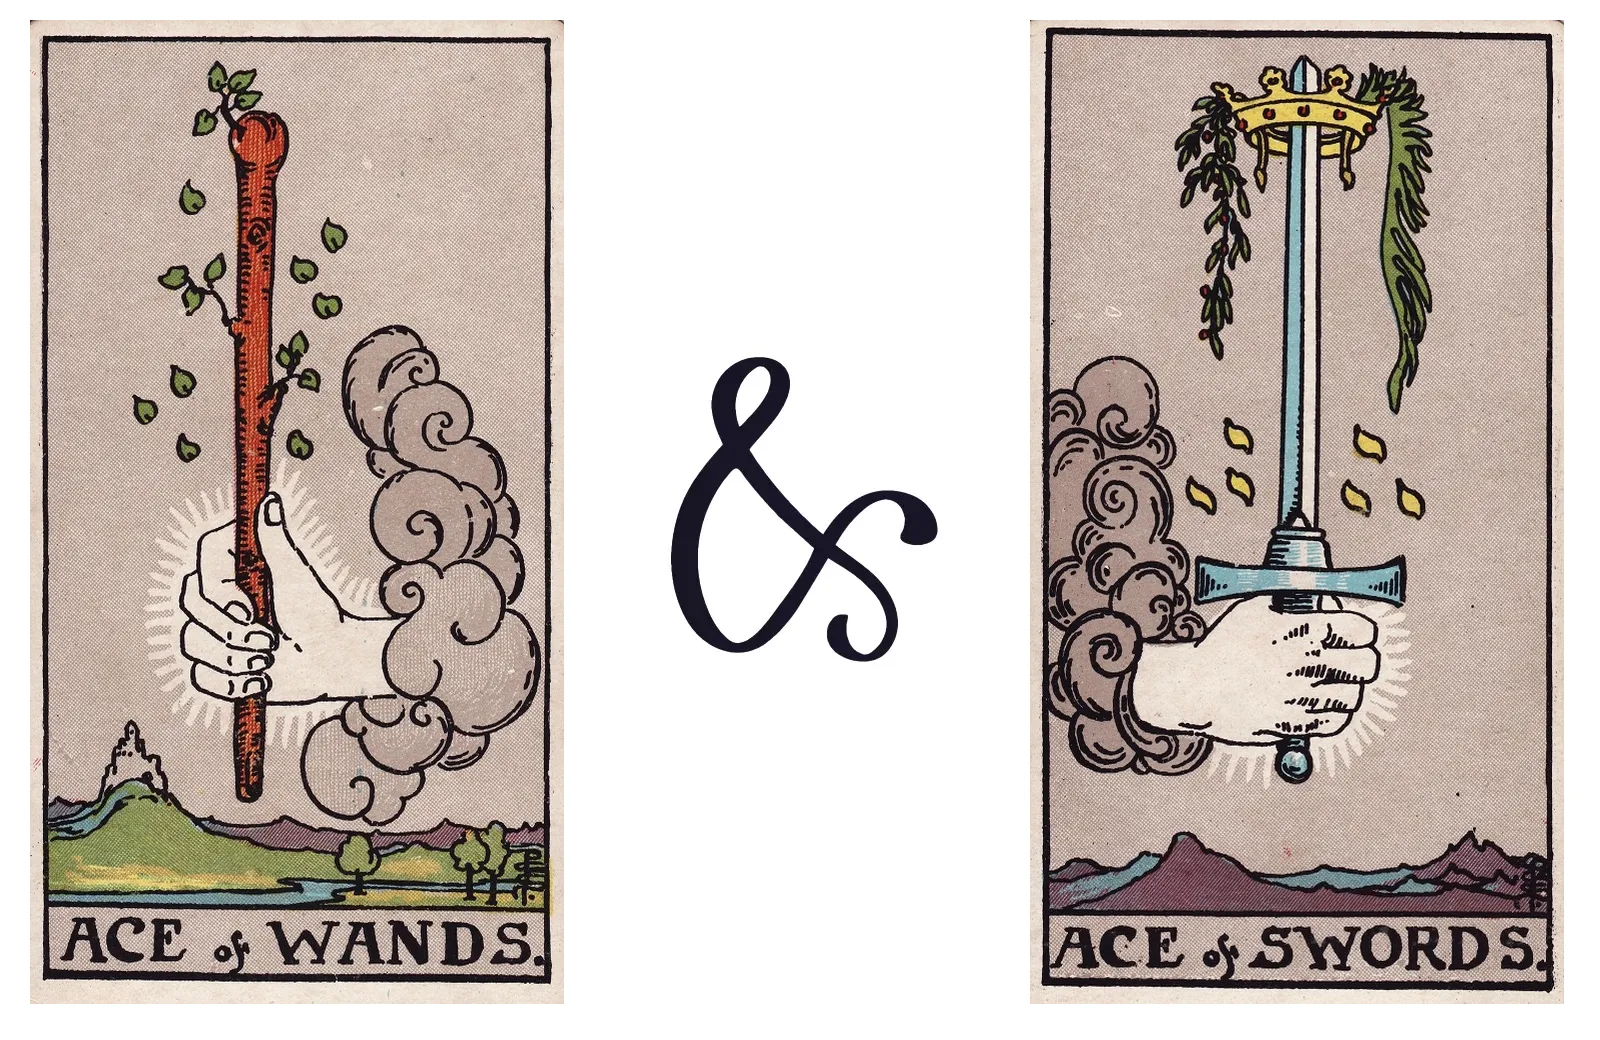 Ace of Wands and Ace of Swords